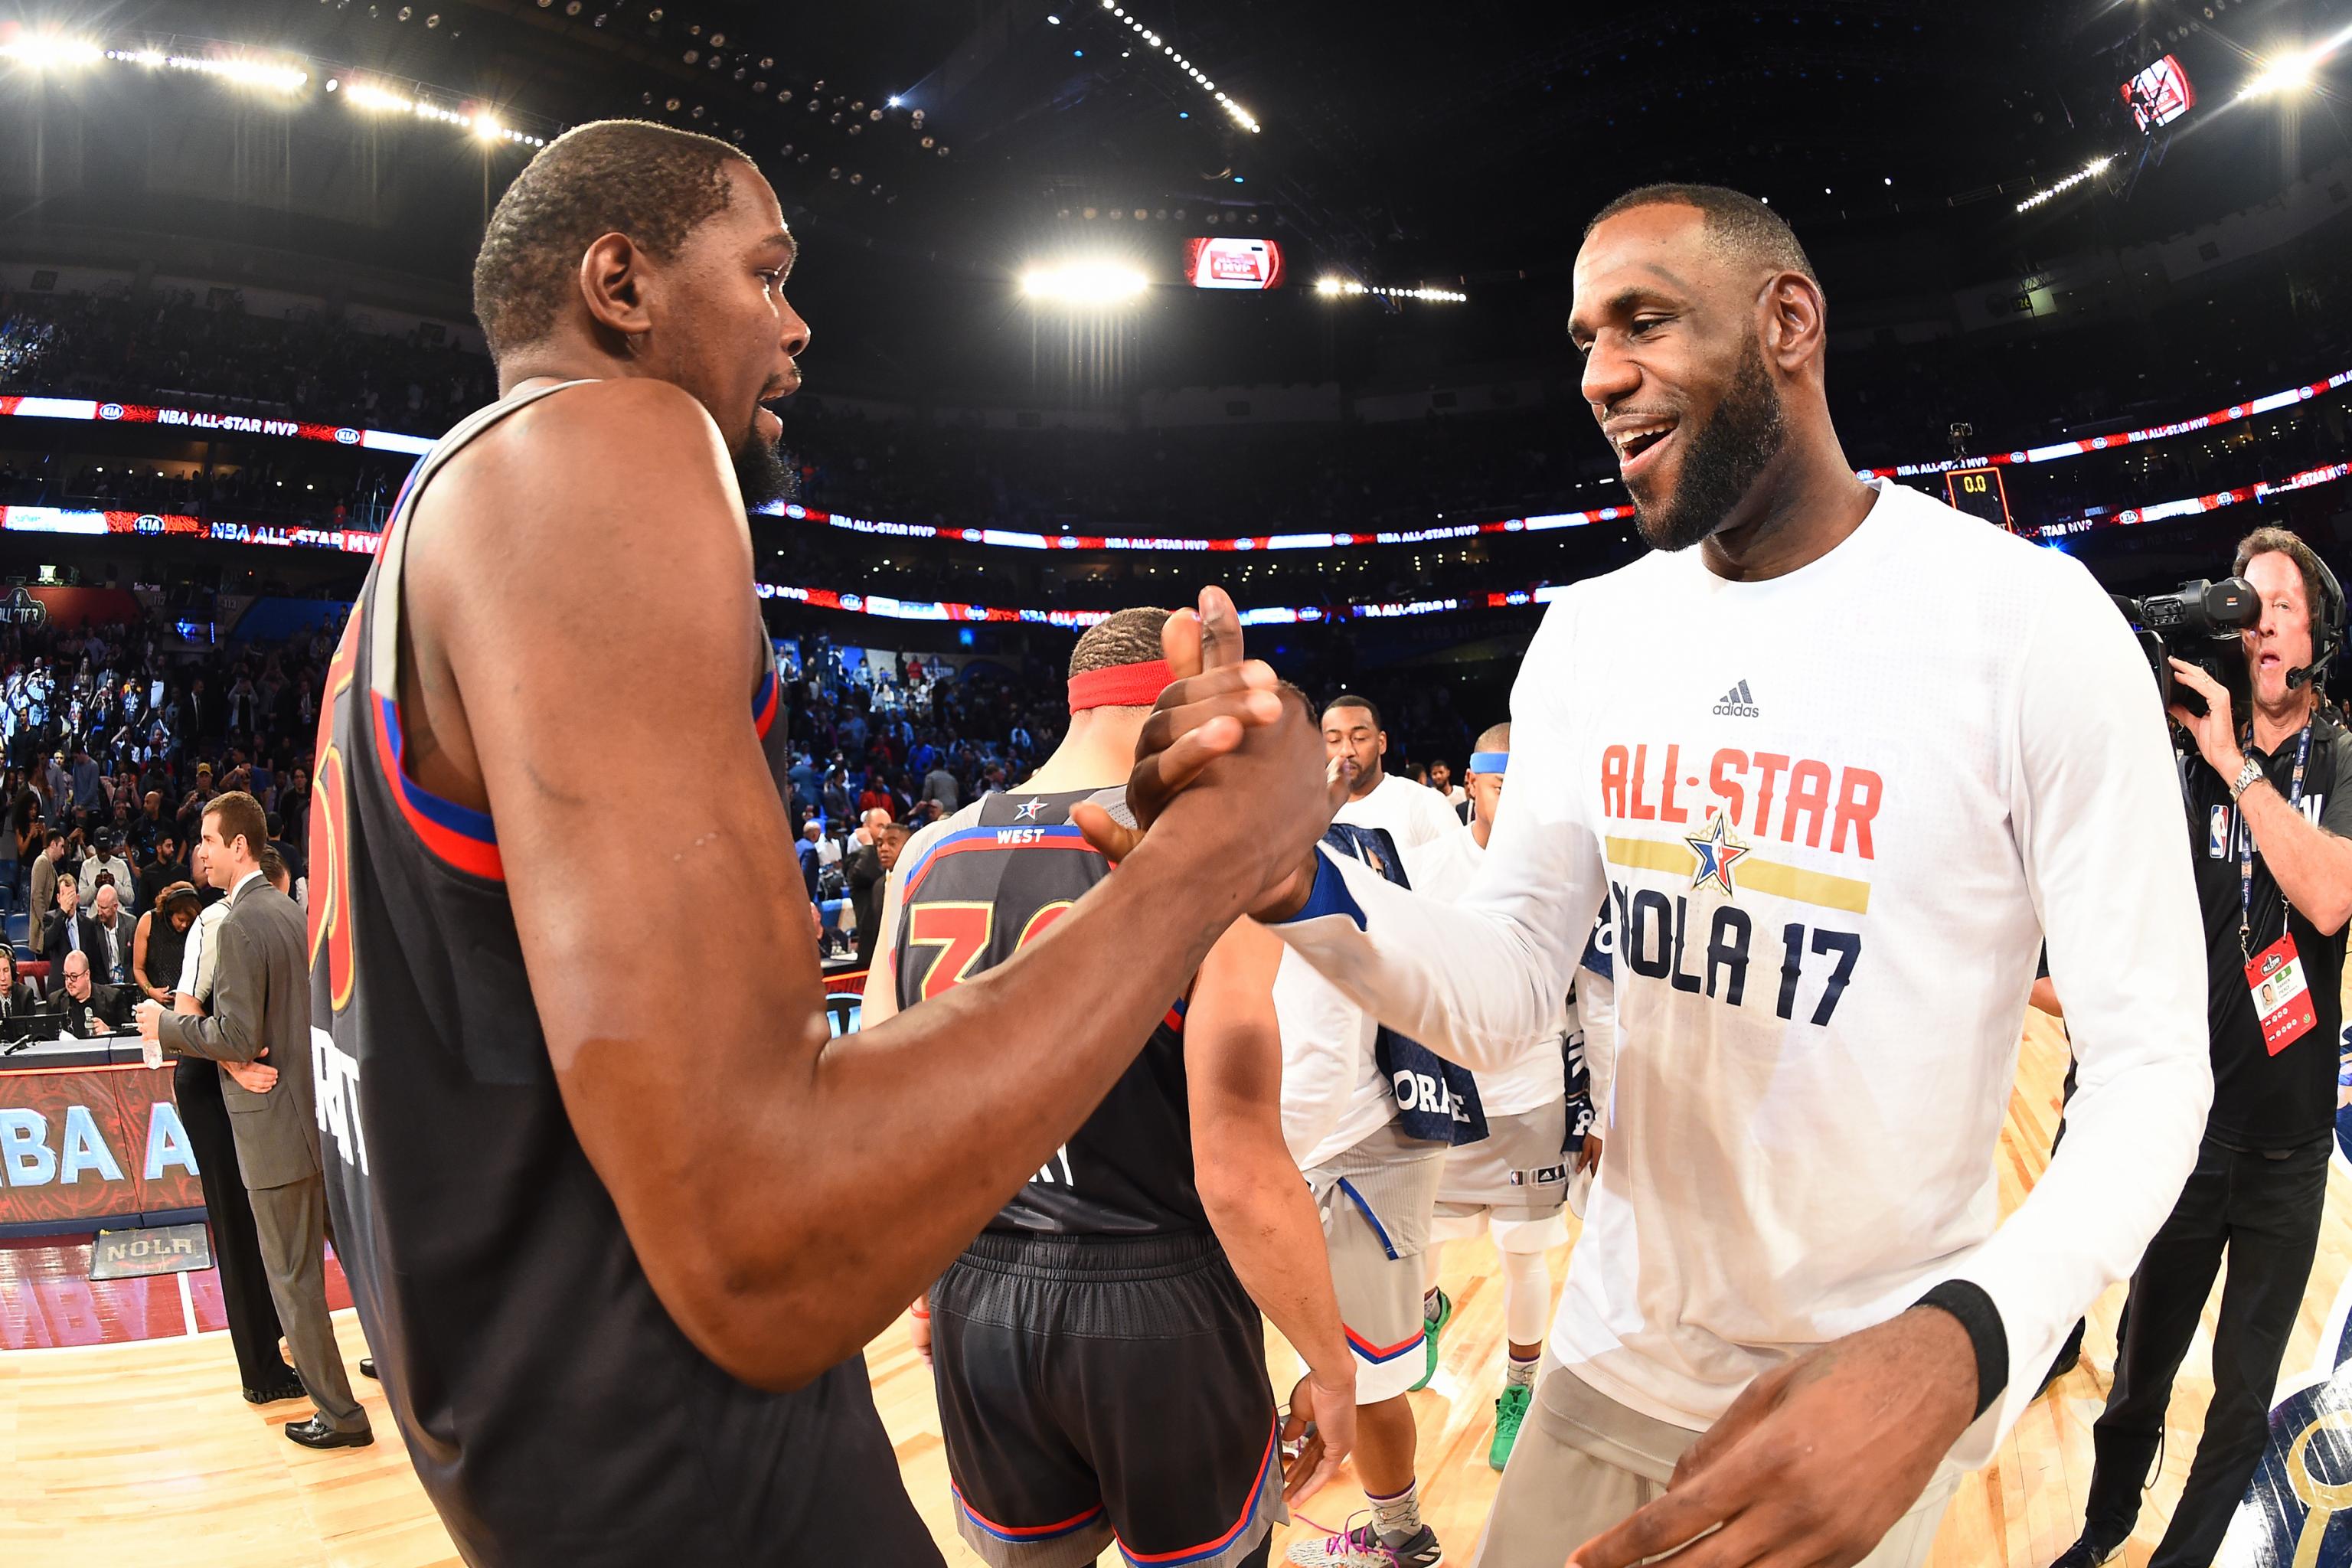 East bests West in All-Star Game